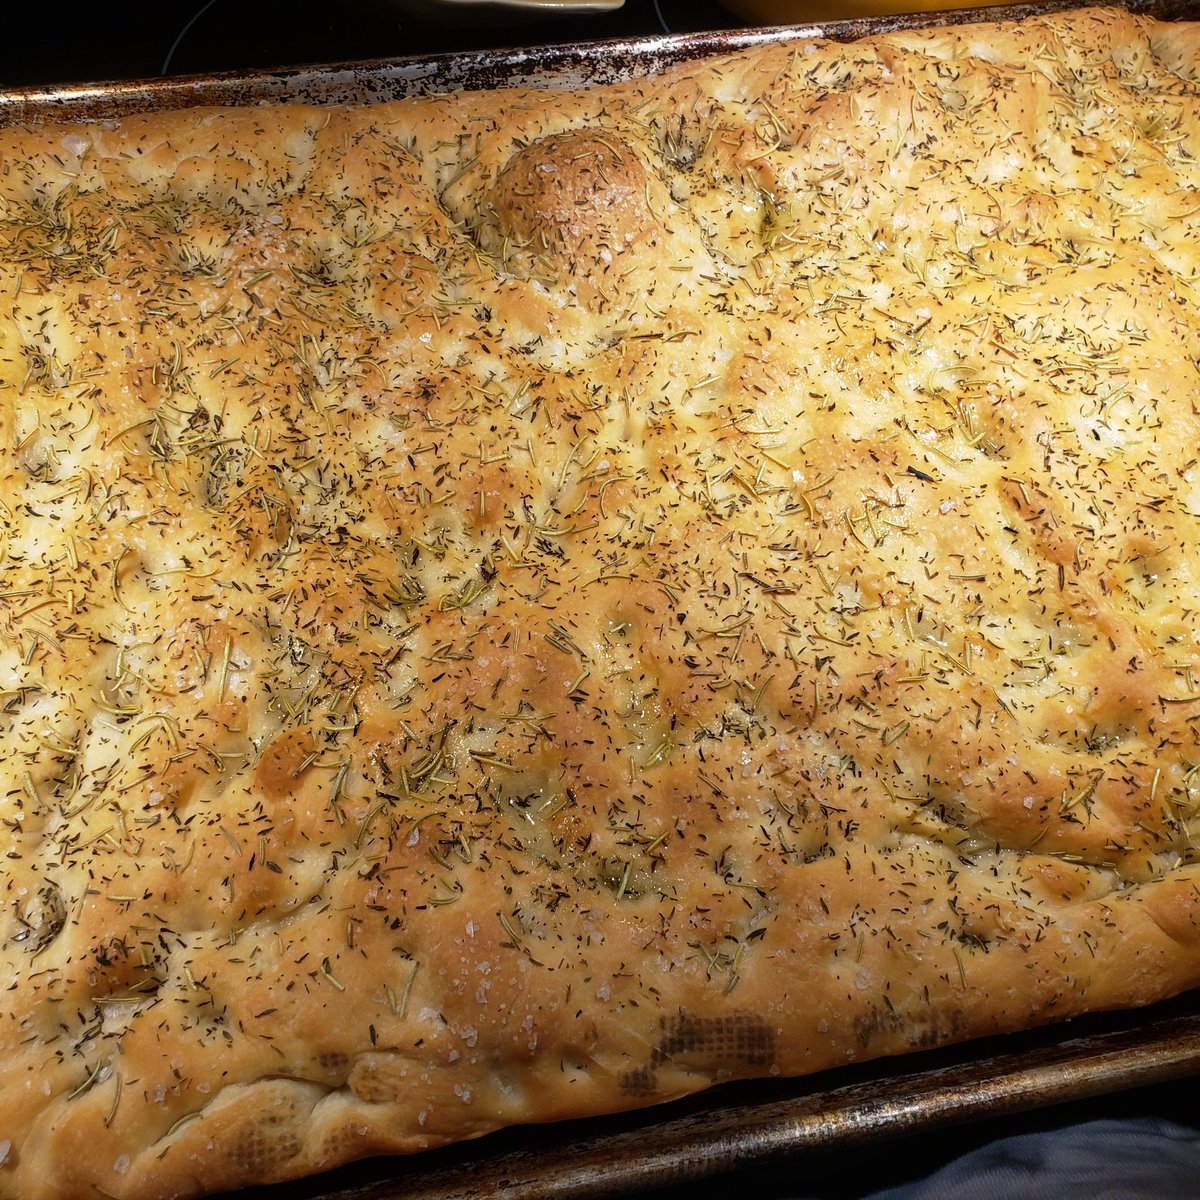 Focaccia straight from the oven

#foccacia #bread #homemade #baking #bakingfromscratch #bakedgoods #baker #bakedgoods #oven #waldoboromaine #waldoboro #maine